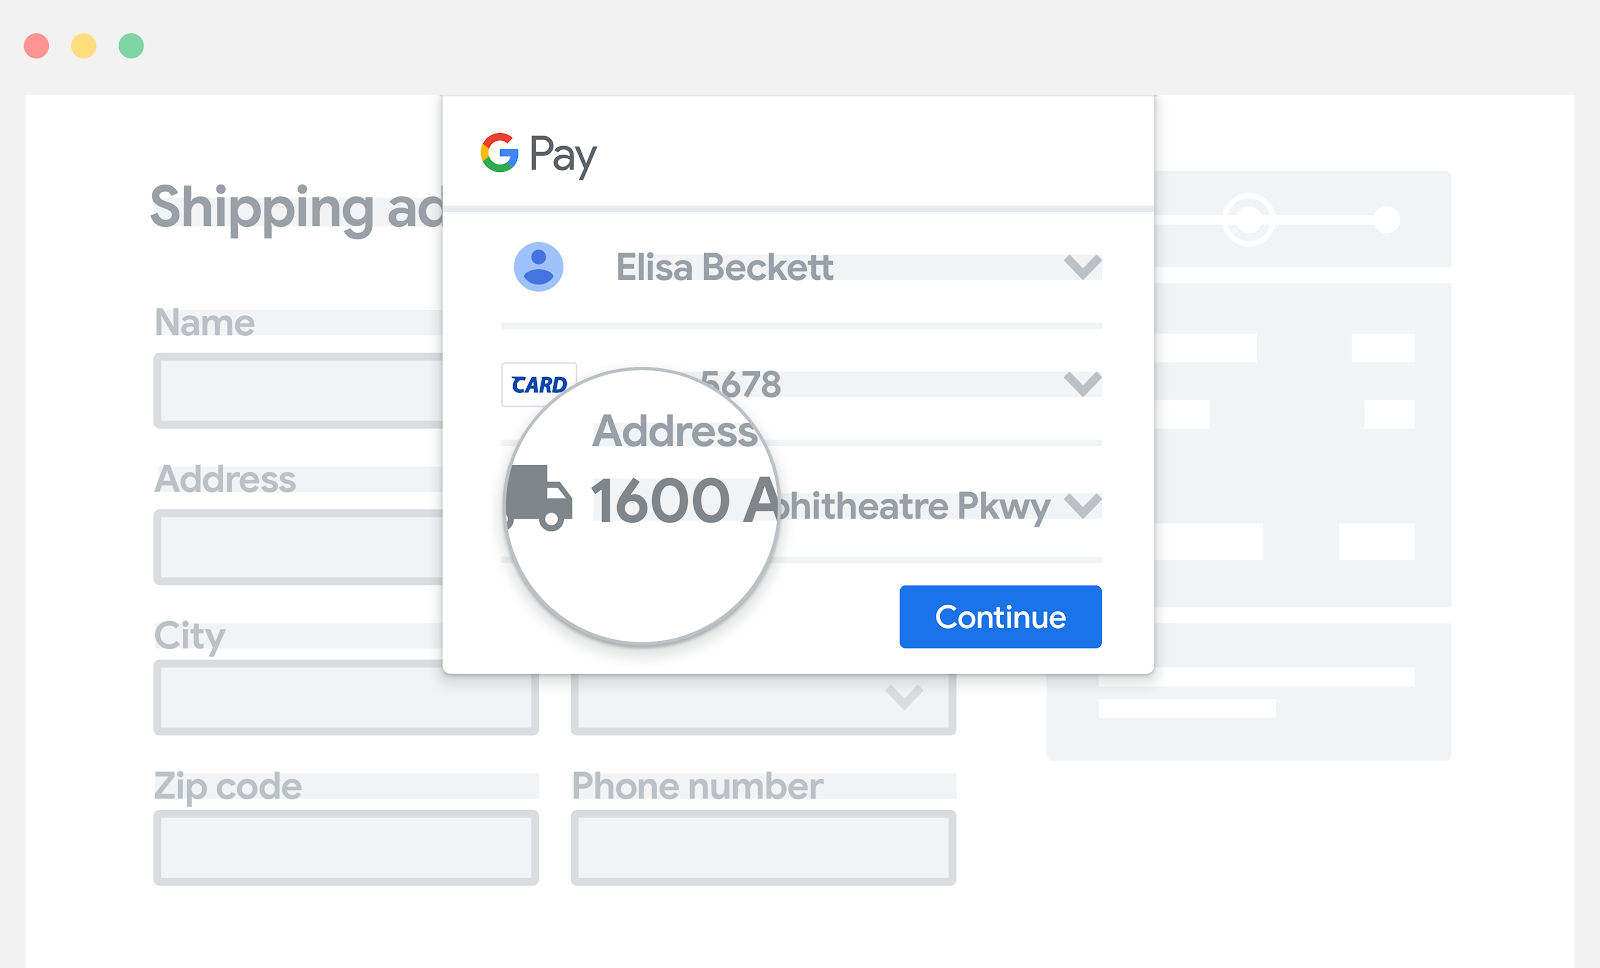 Place Google Pay above manual entry fields for payment information.